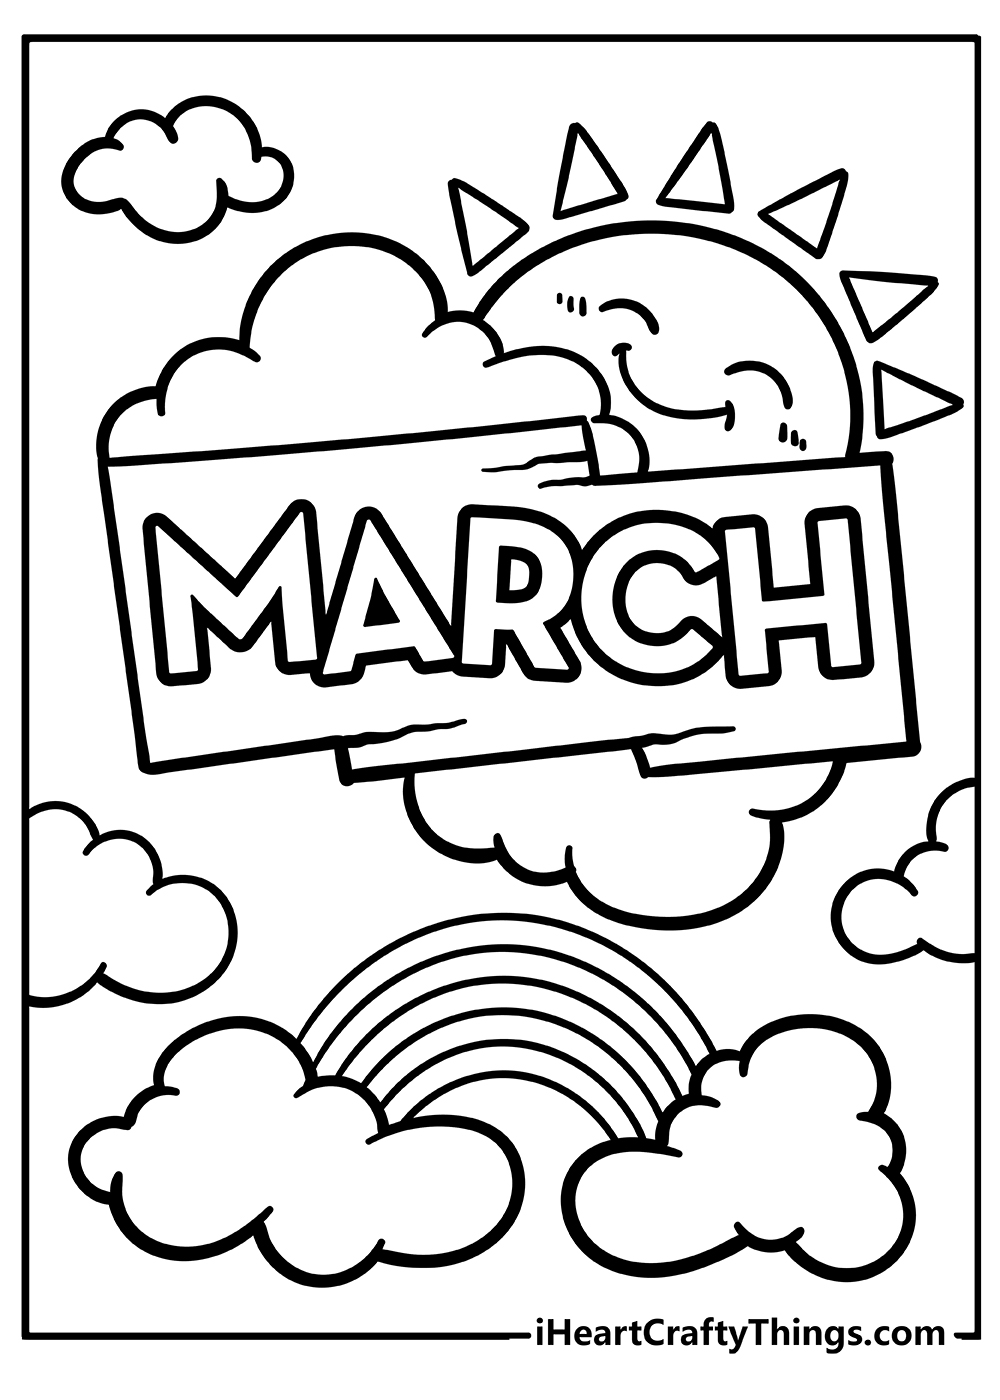 March Coloring Pages for kids free download